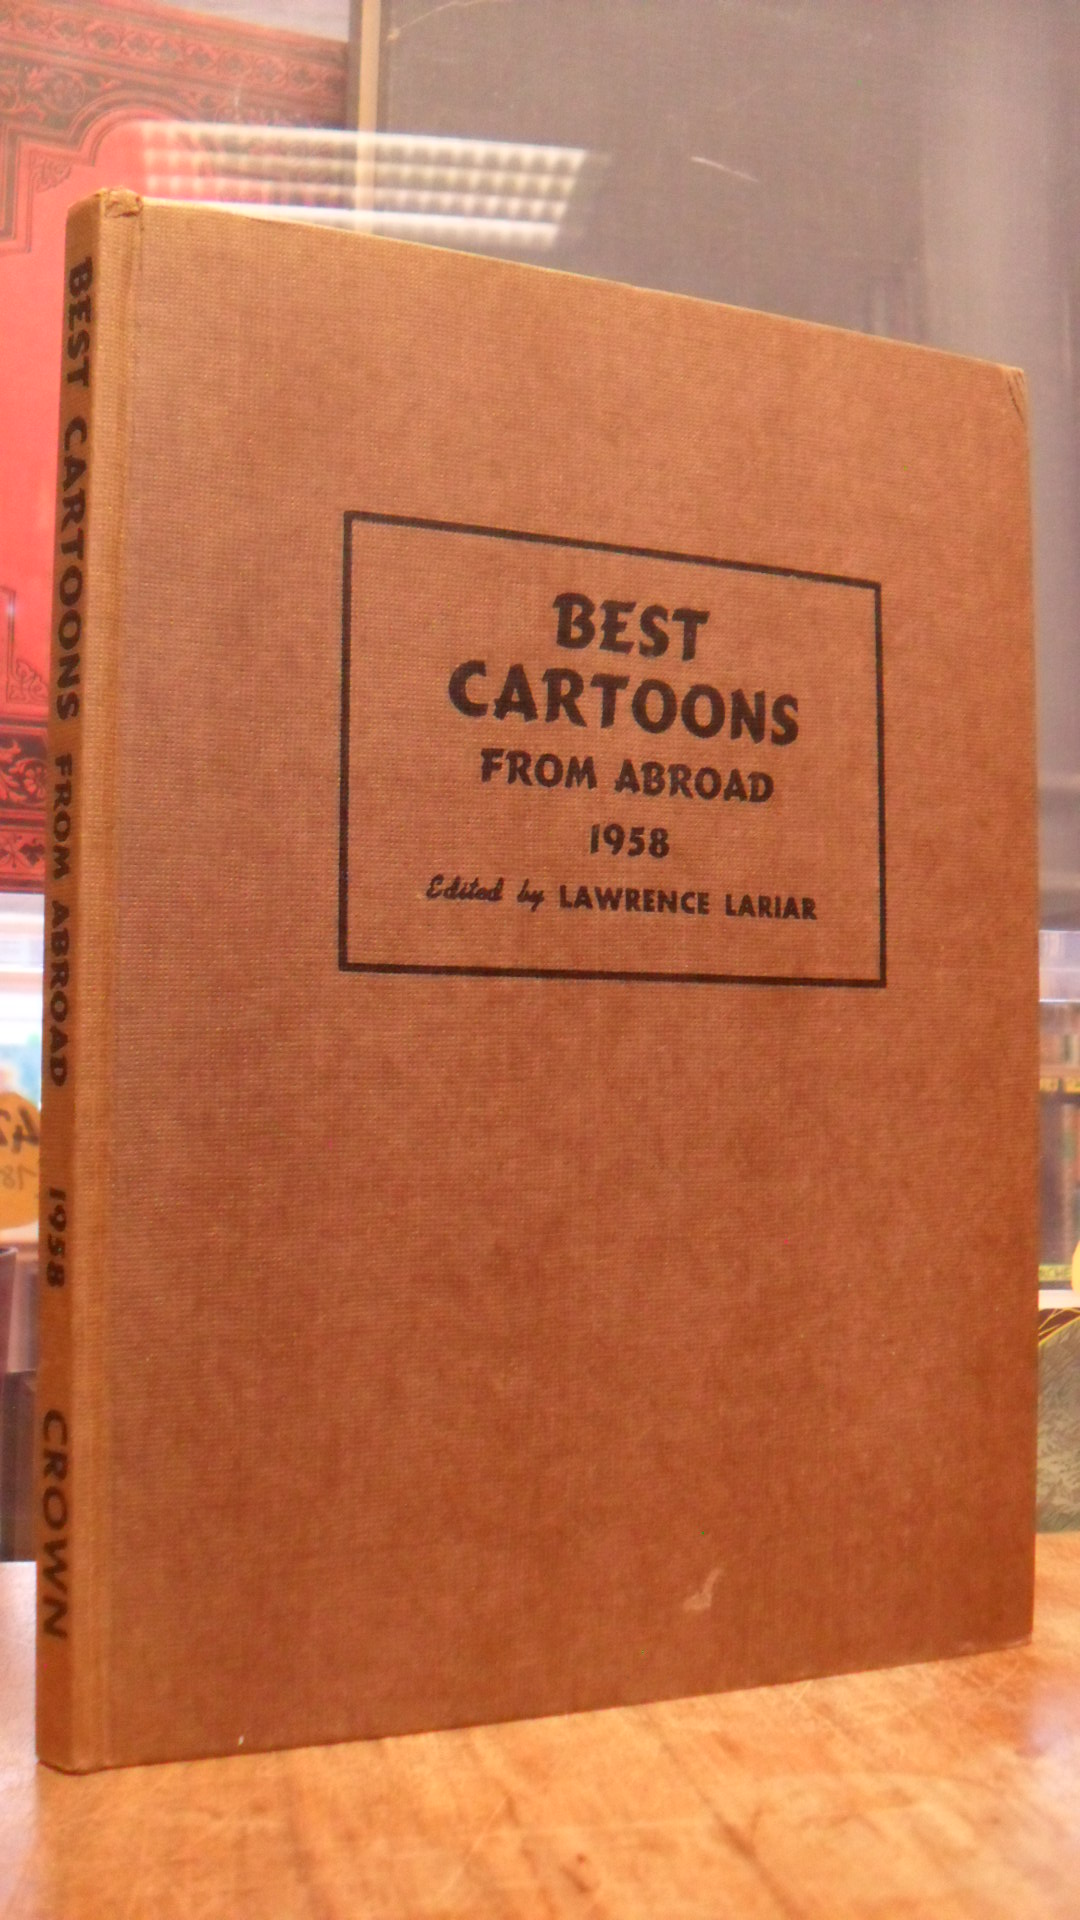 Lariar, Best Cartoons from Abroad 1958 – A collection of the best cartoons from